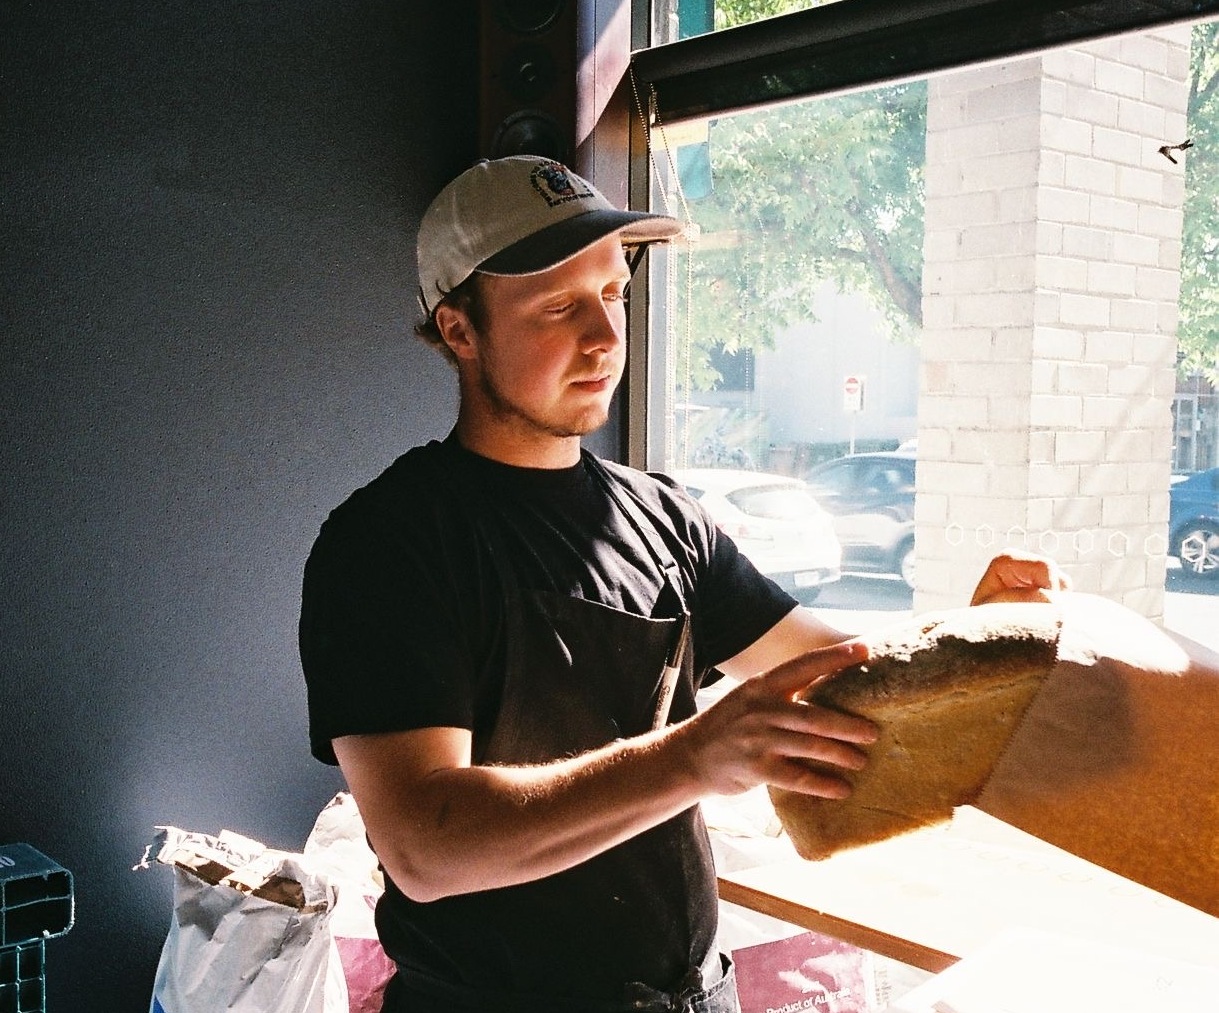 Five minutes with Lach Cutting, UNDER Bakery